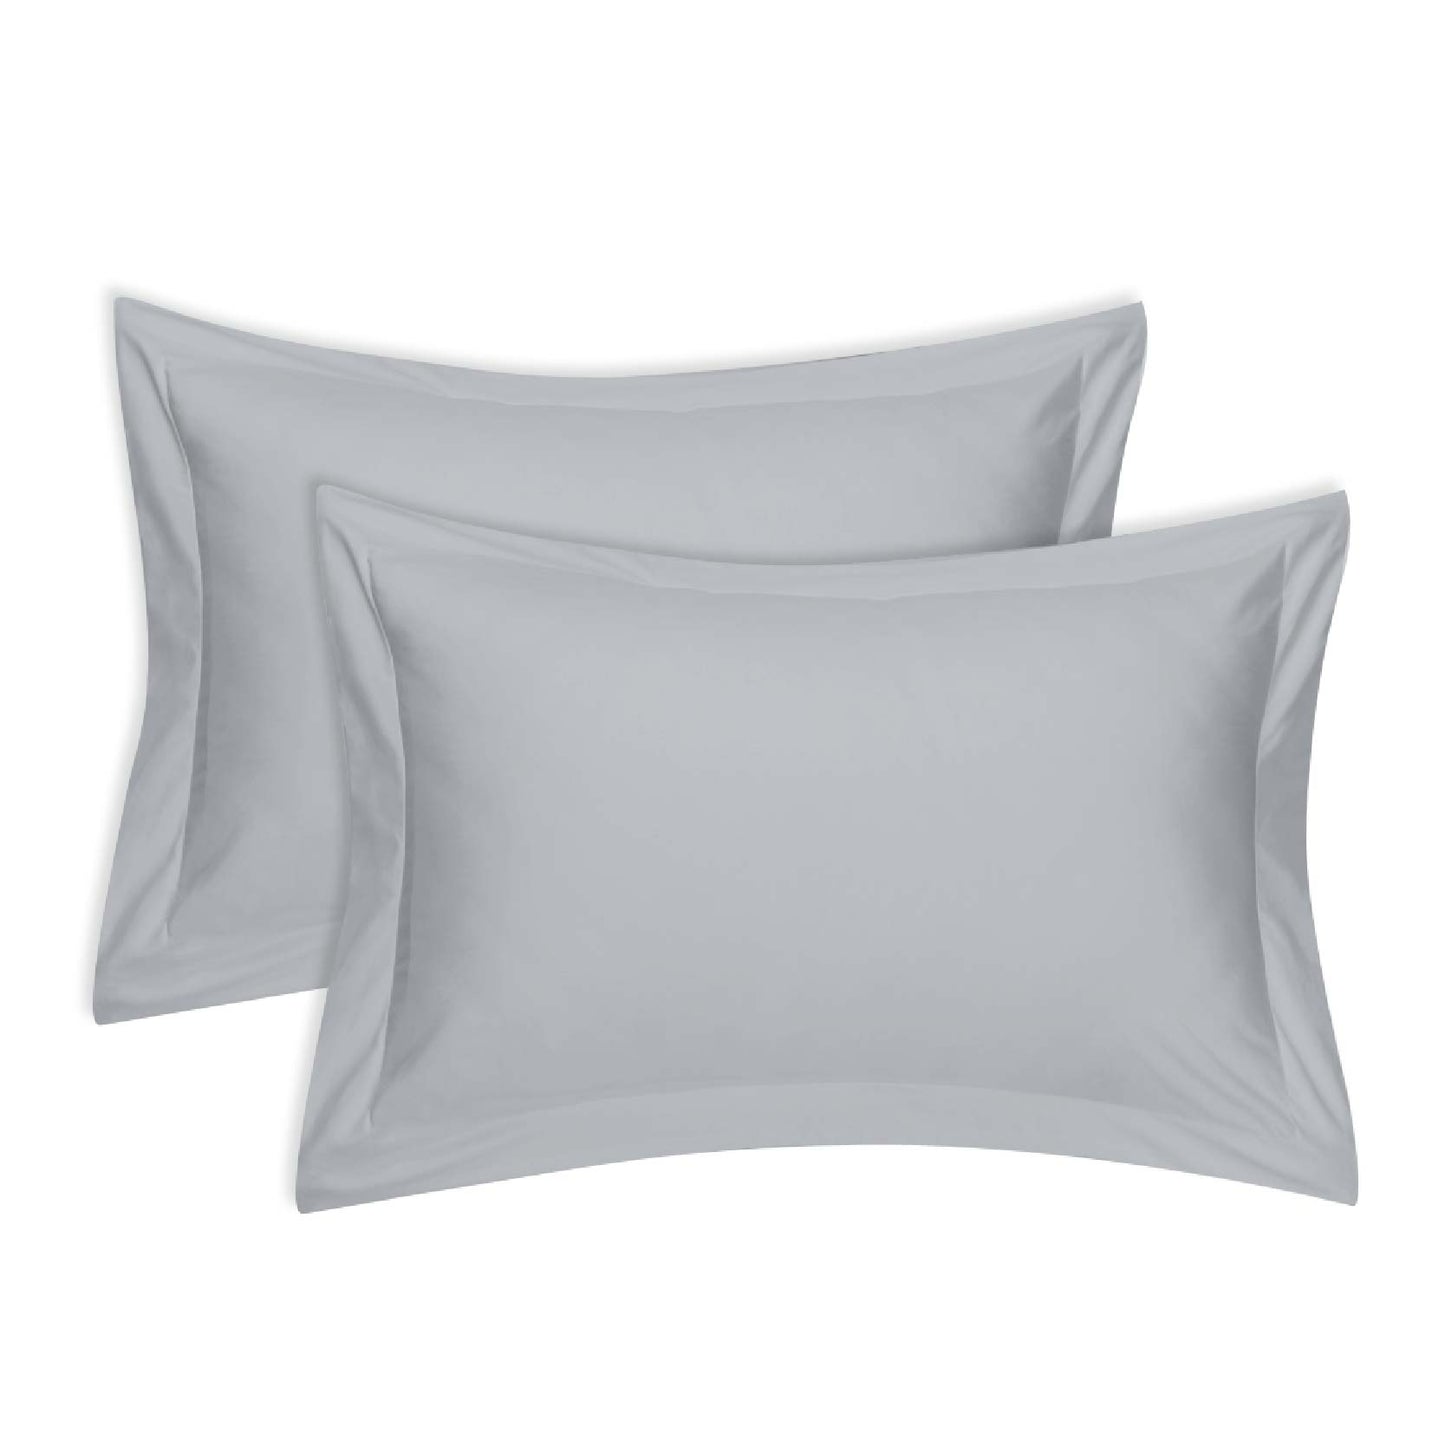 Jean Perry Colorie 2pcs Pillow Case - 100% Combed Cotton Sateen